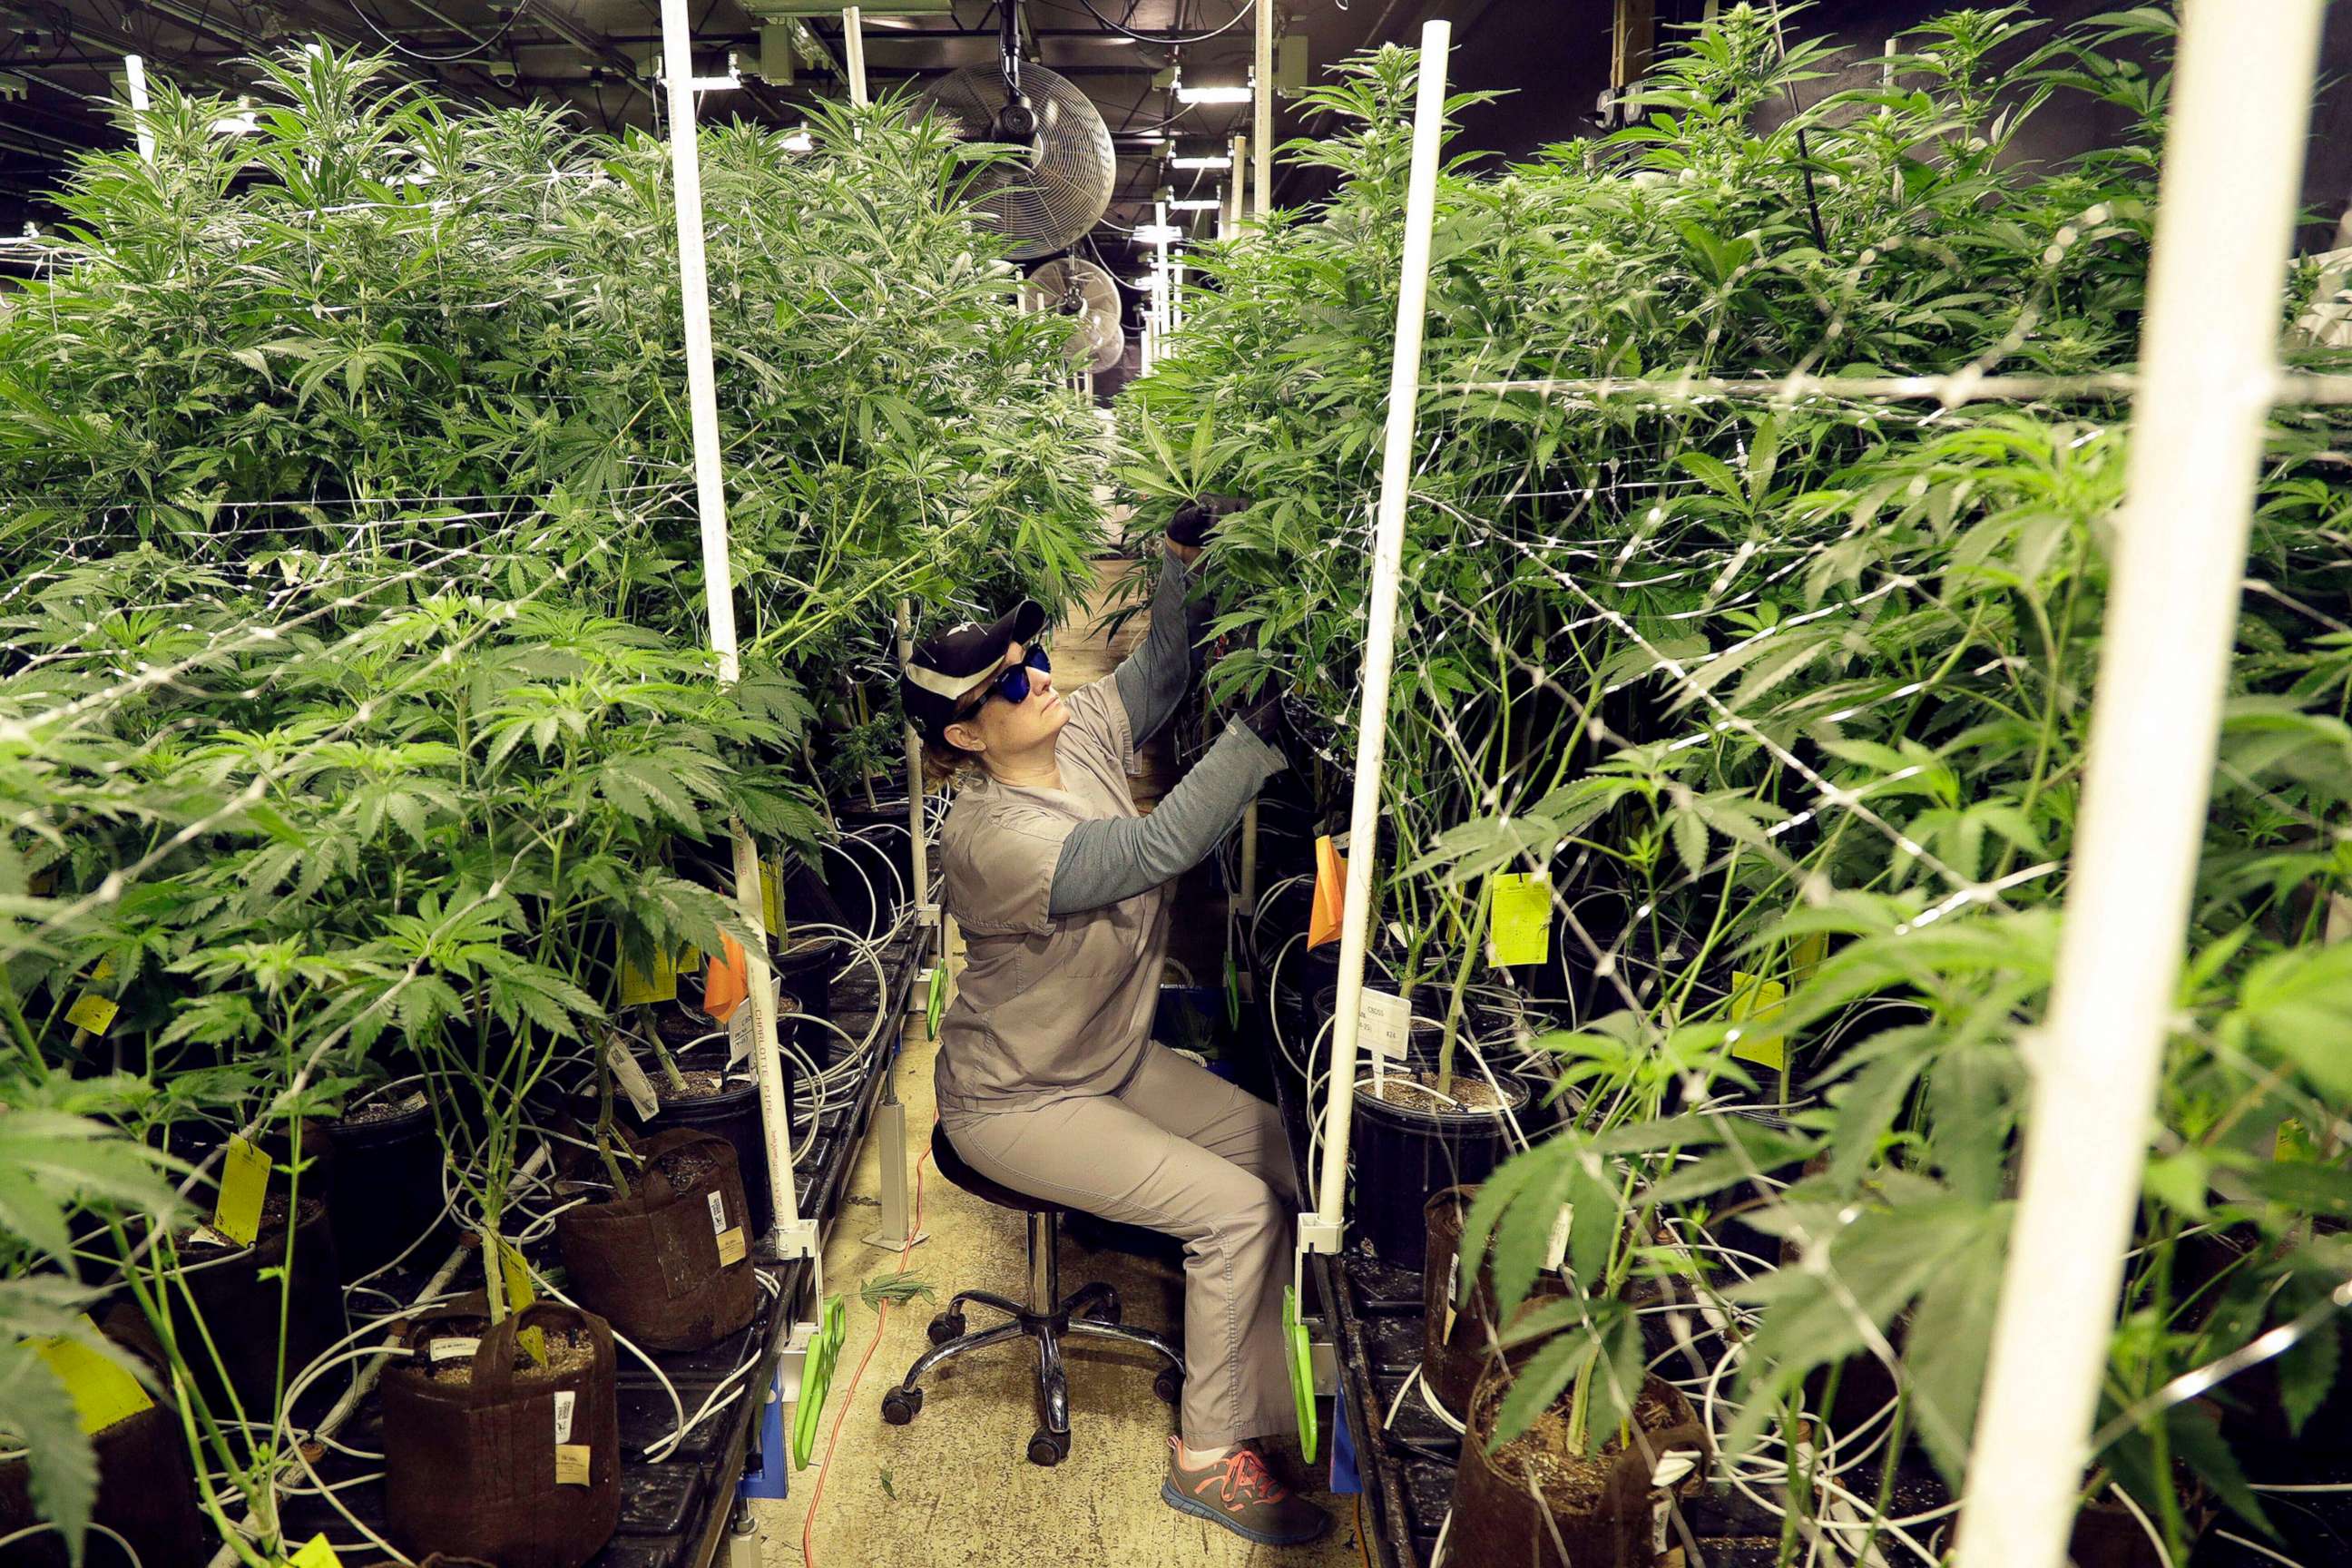 PHOTO: A grow employee at Compassionate Care Foundation's medical marijuana dispensary, trims leaves from marijuana plants in the company's grow house in Egg Harbor Township, N.J., March 22, 2019.